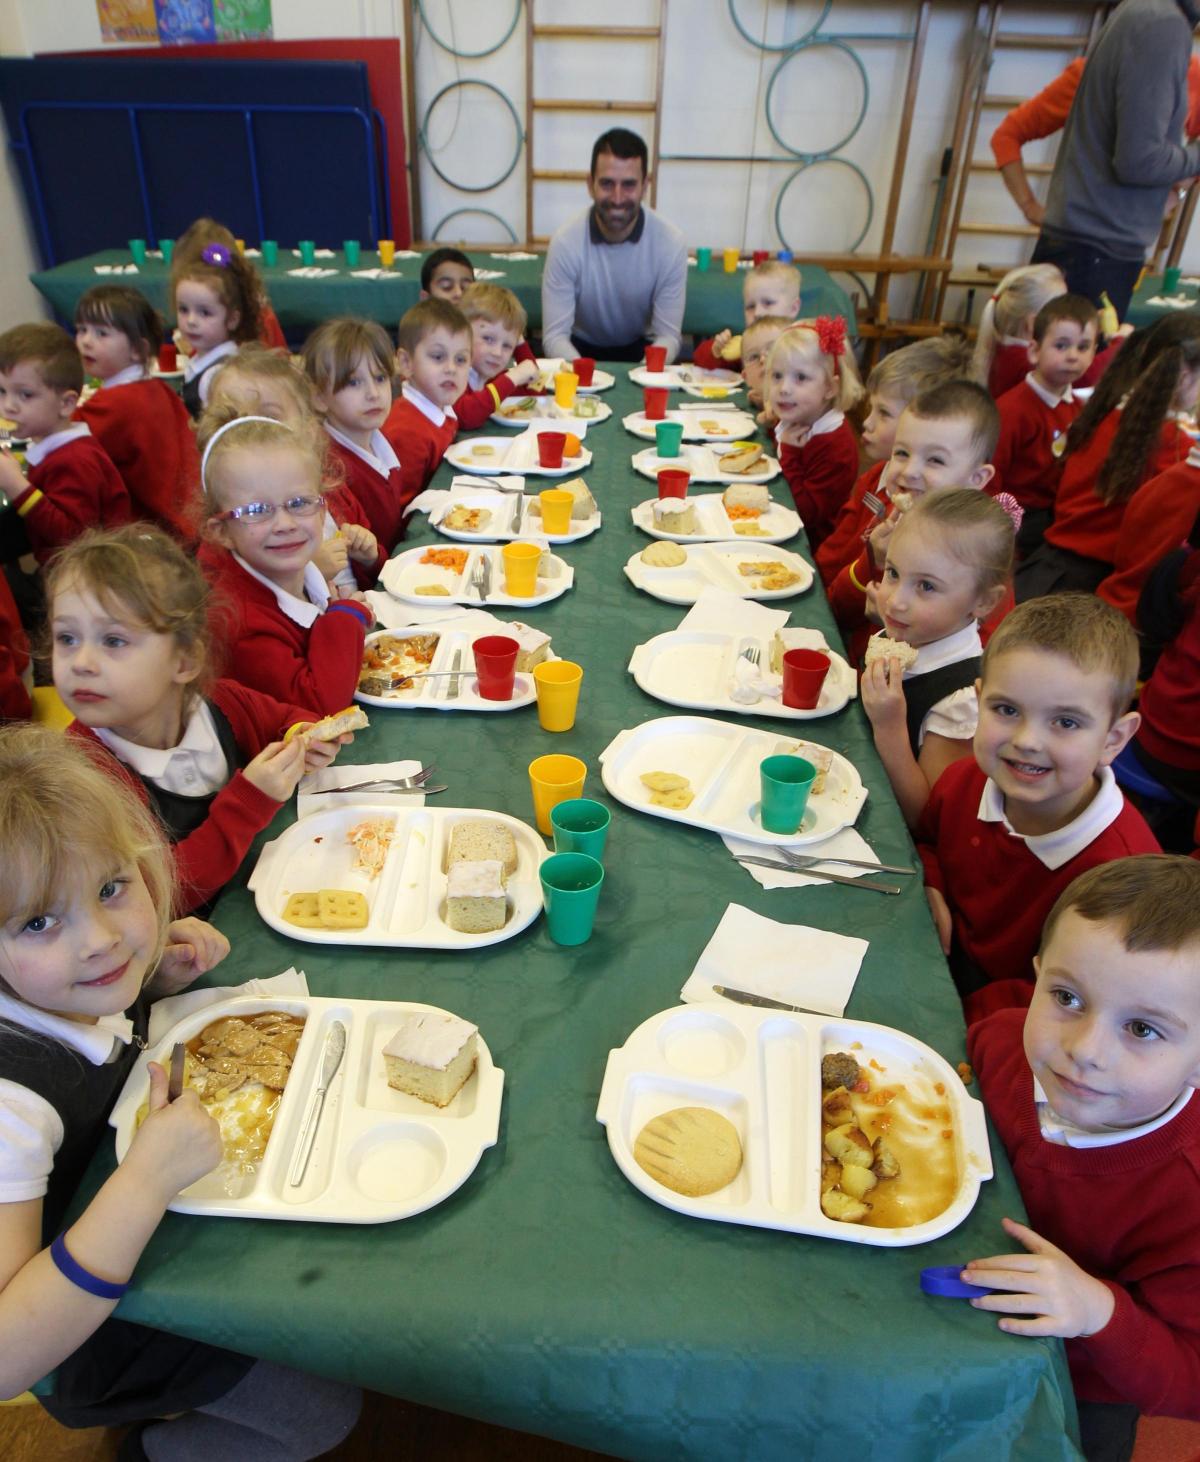 Picture from Matt Le Tissier and Francis Benali's trip to Townhill Infant School for a healthy lunch.